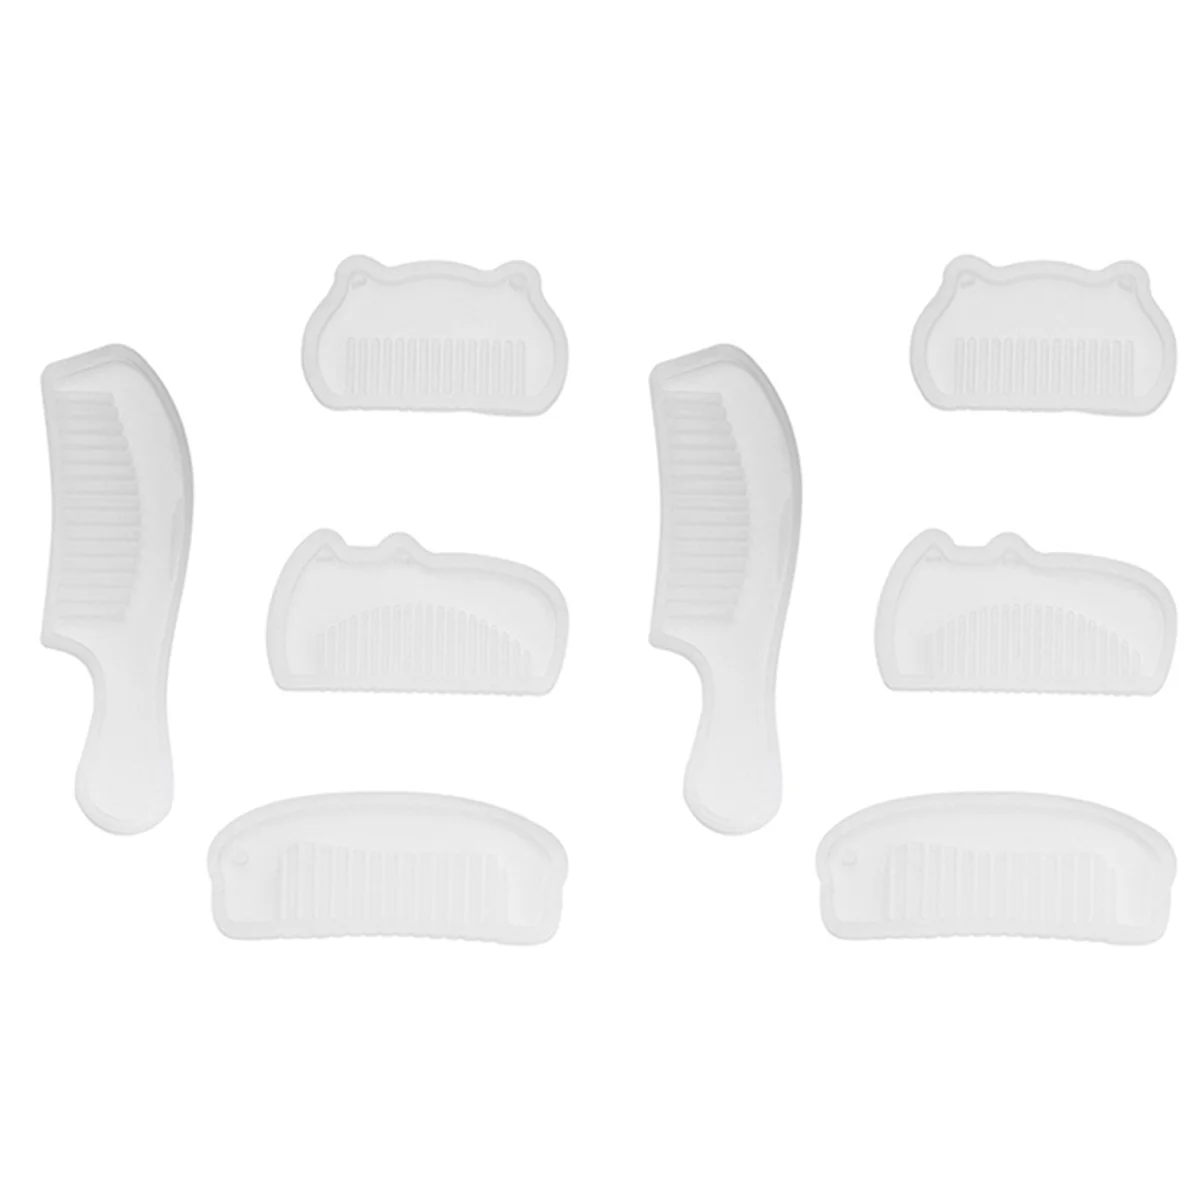 

8 Pcs/Set Comb Series Art Silicone Mold DIY Hand Craft Epoxy Resin for Jewelry Making Tools